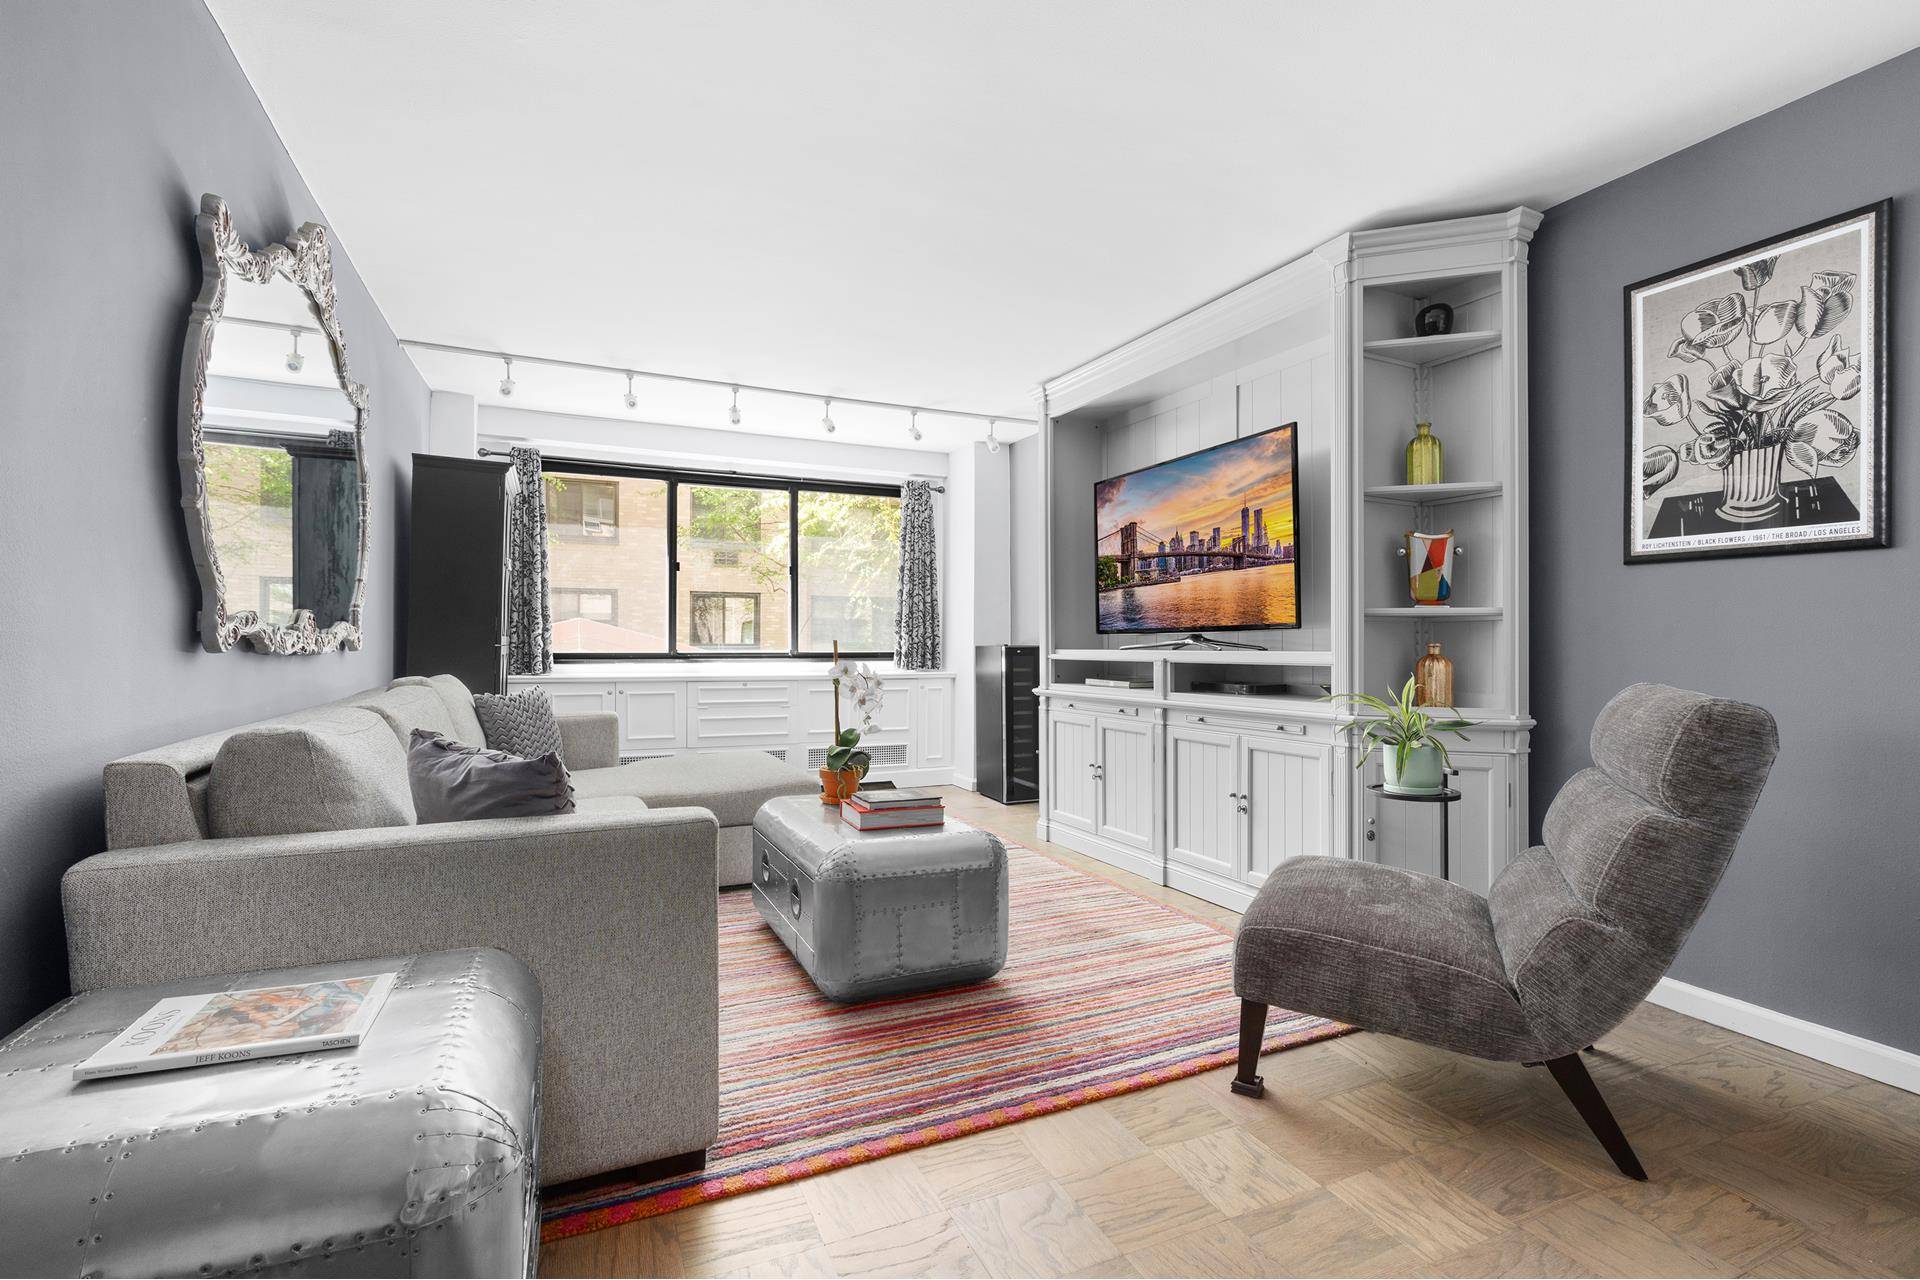 Absolutely Stunning ! Apartment 2KN at The Chelsea Lane is a meticulously renovated, oversized one bedroom home with southern exposure overlooking the building's lushly planted courtyard.